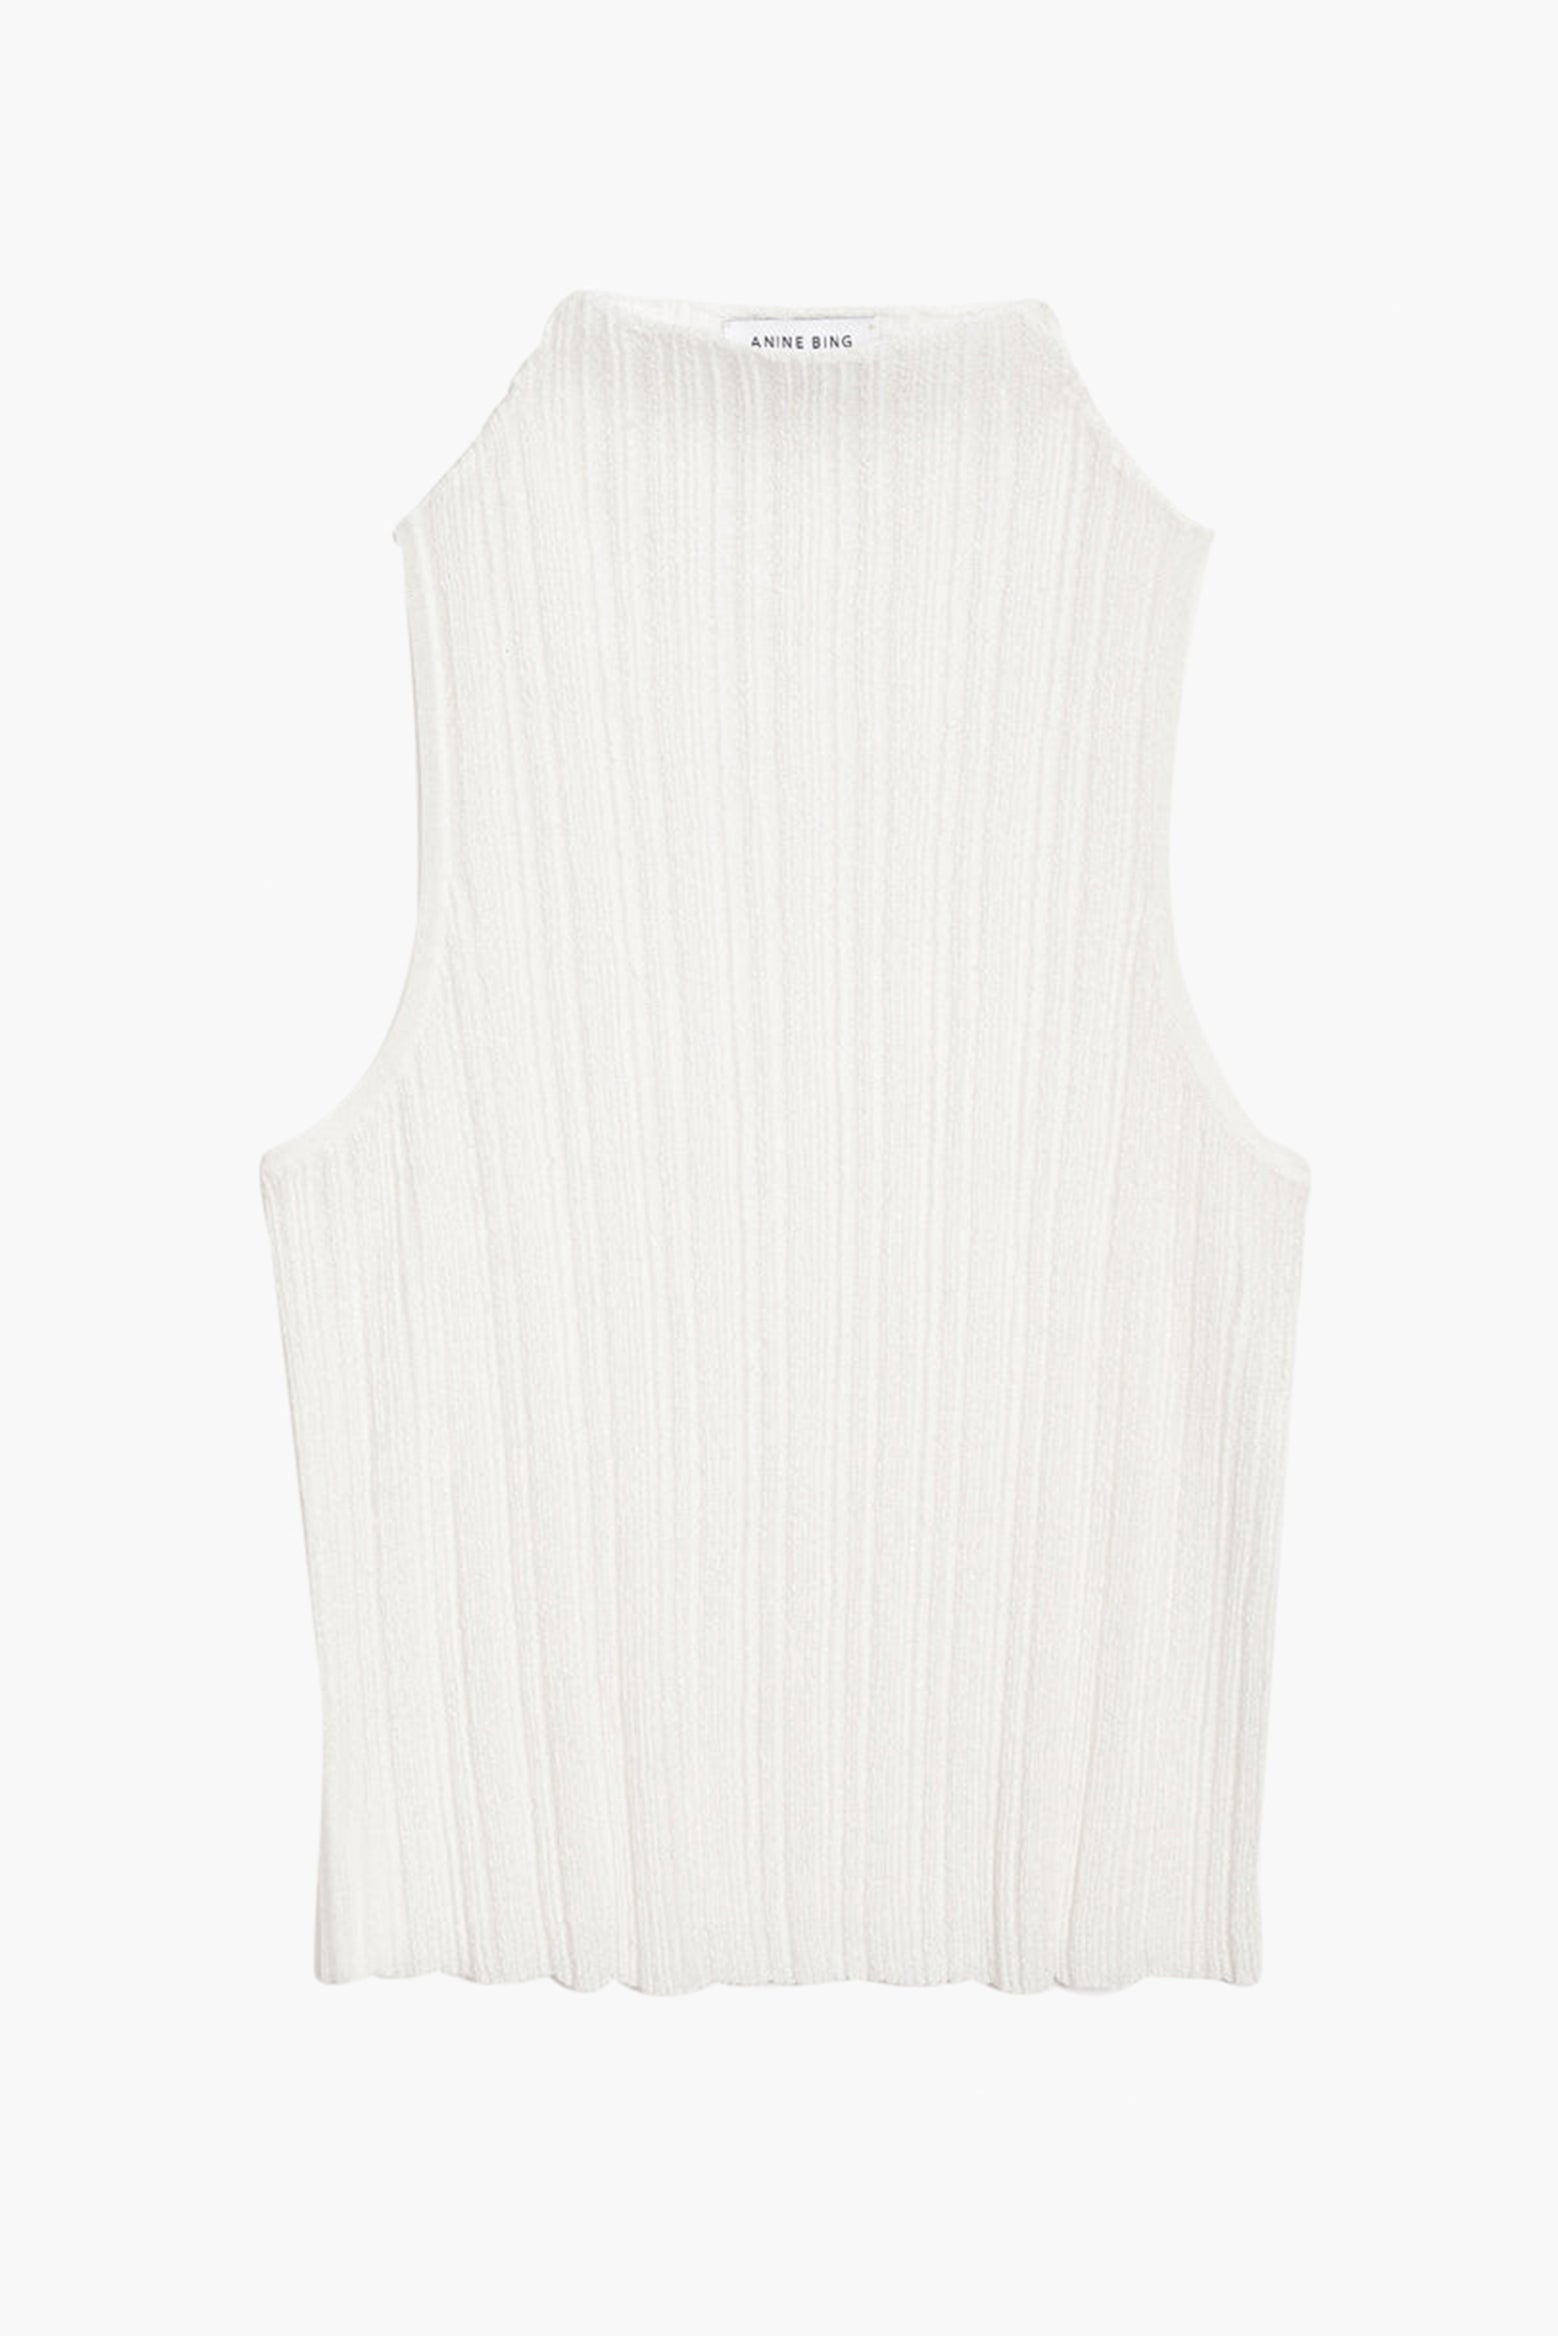 Anine Bing Harlow Top in White available at The New Trend Australia.